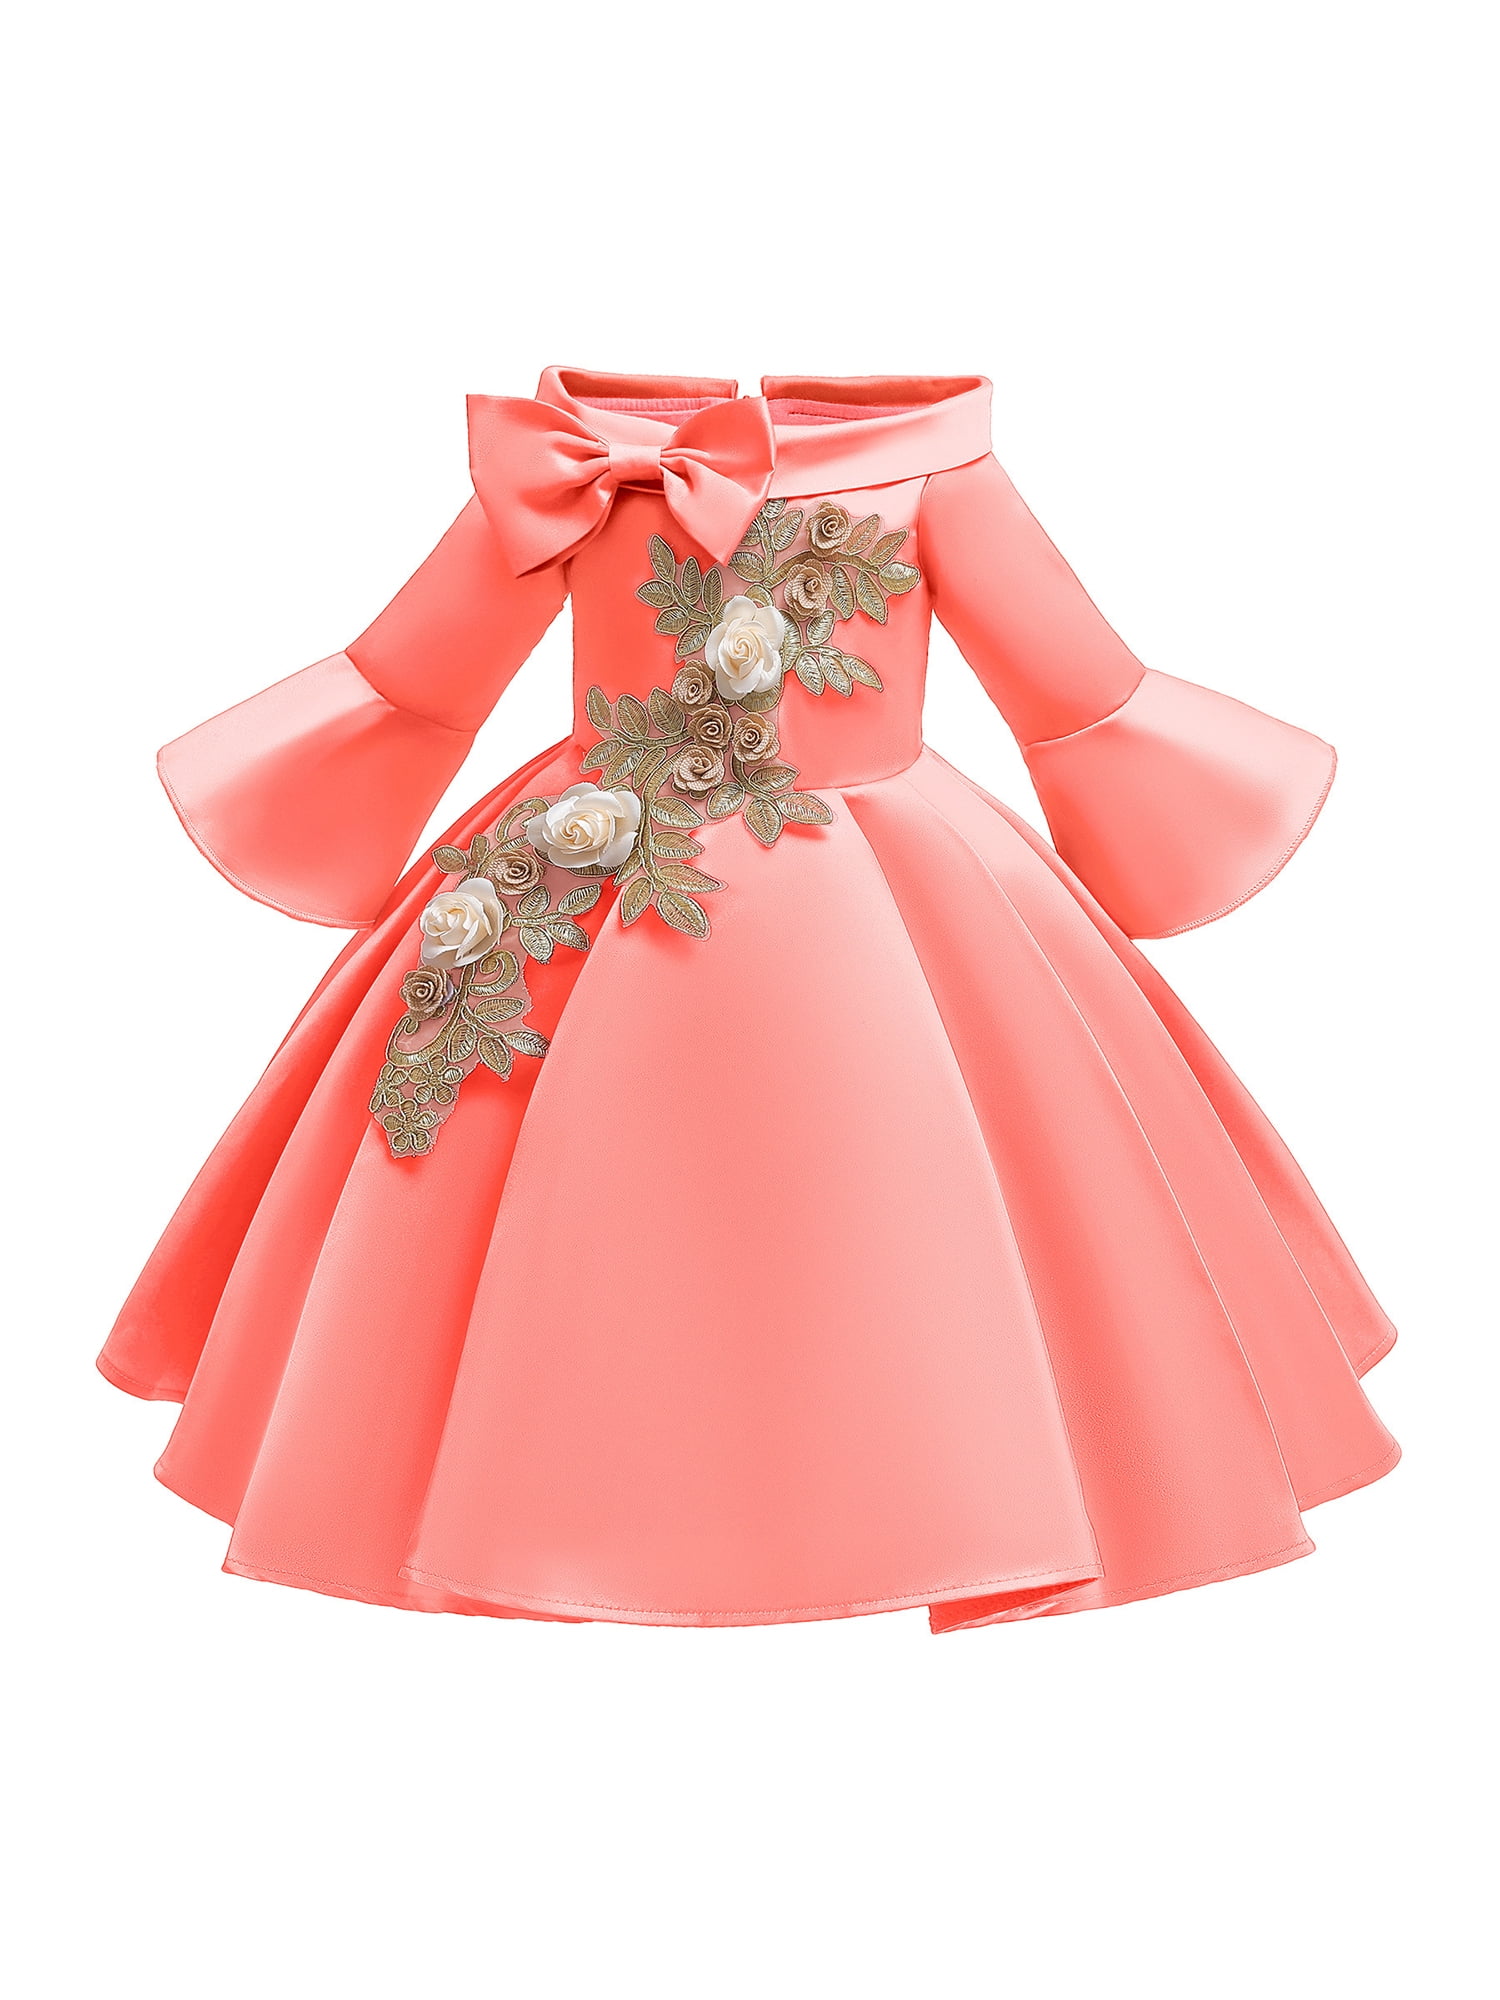 Childrens Girls Baby Elegant Flower Floral Embroidered Party Formal Dress Gown 